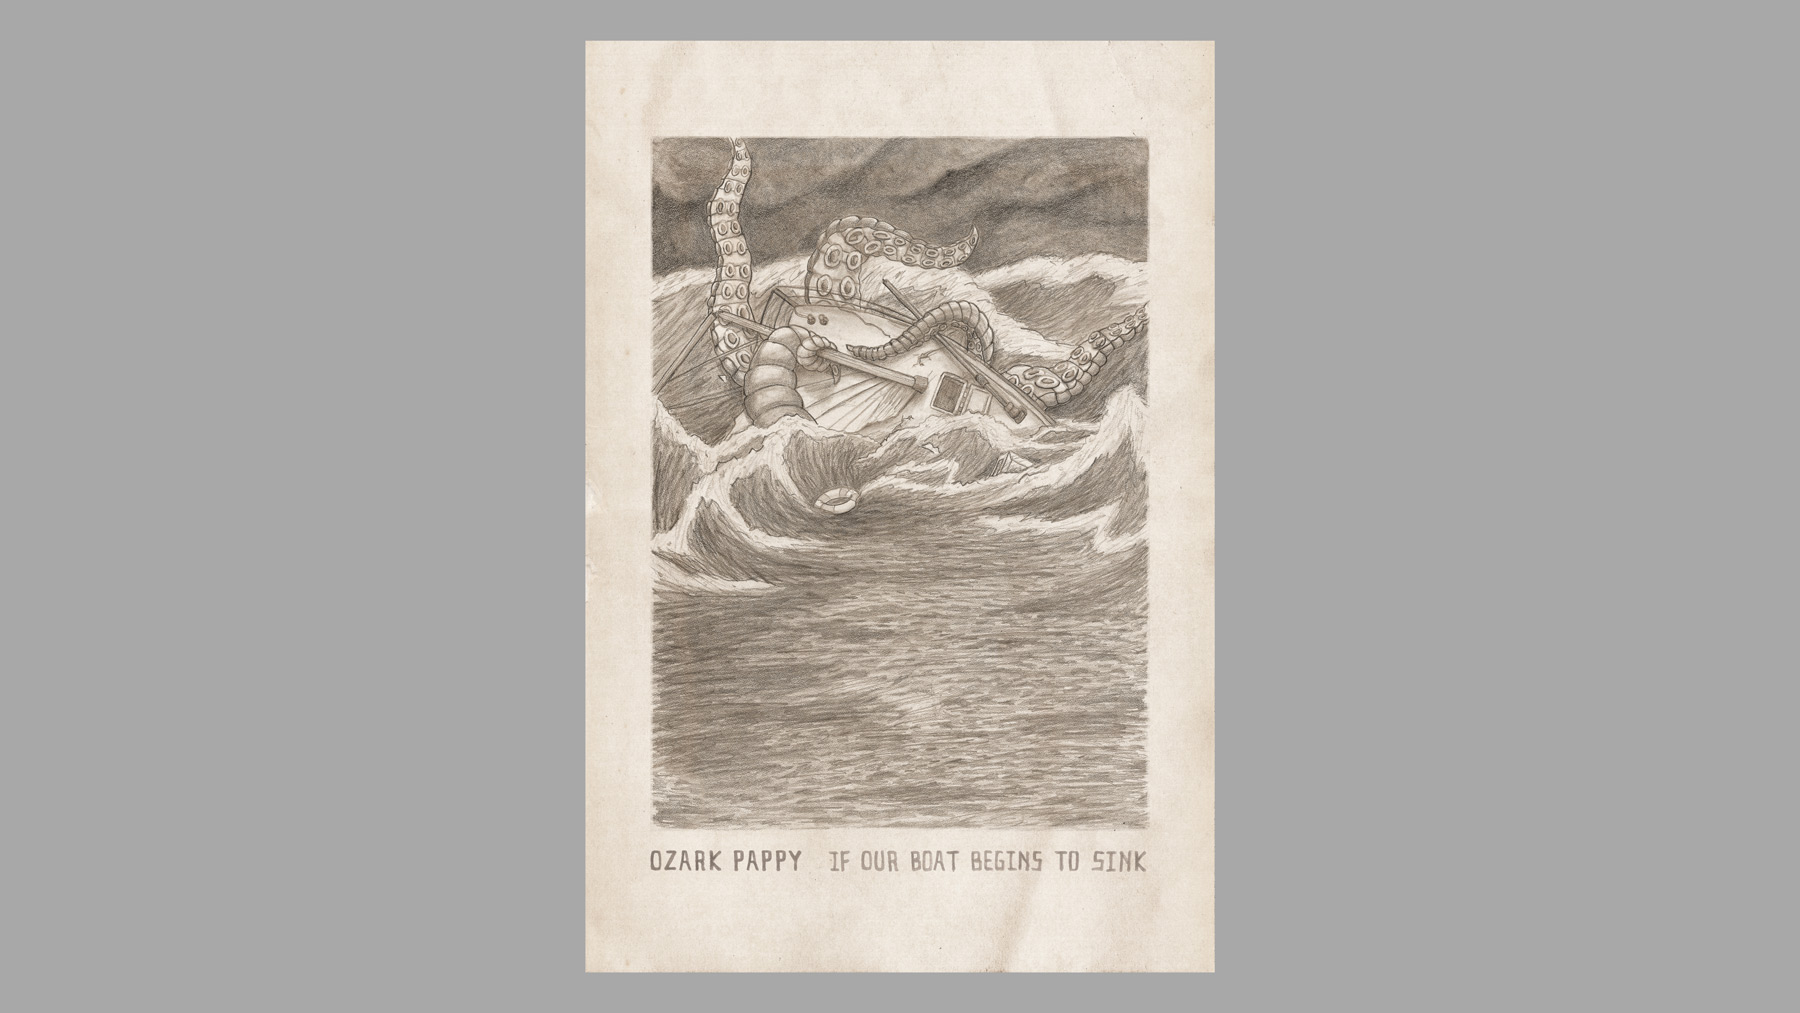 Poster illustration of album cover - ship being capsized by giant squid